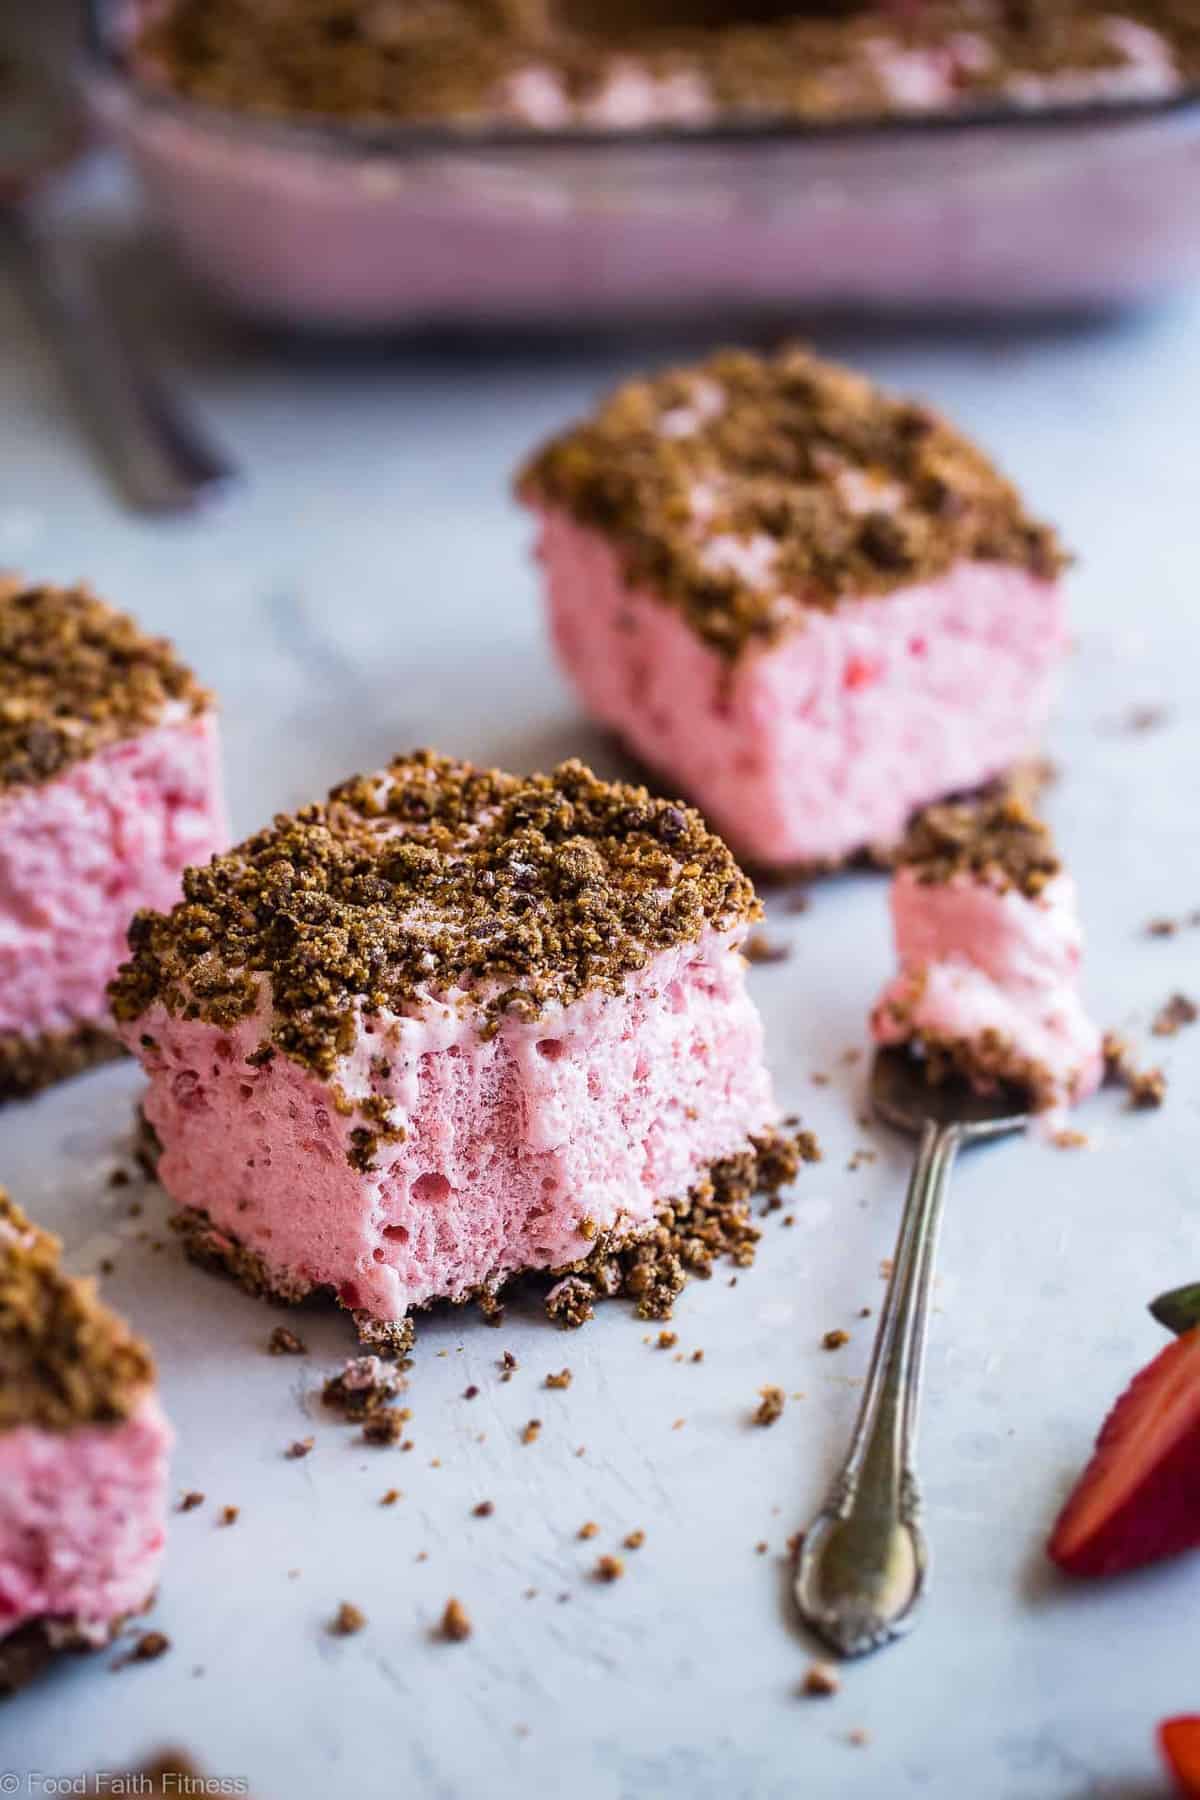 Strawberry Freeze - Need some easy, healthy desserts? A low calorie, quick and easy, gluten free healthy Frozen Strawberry Dessert Recipe with a crunchy, pecan crumble! Always a hit with kids and adults and everyone always wants the recipe! | #Foodfaithfitness | #Glutenfree #Dairyfree #Healthy #Strawberries #Dessert